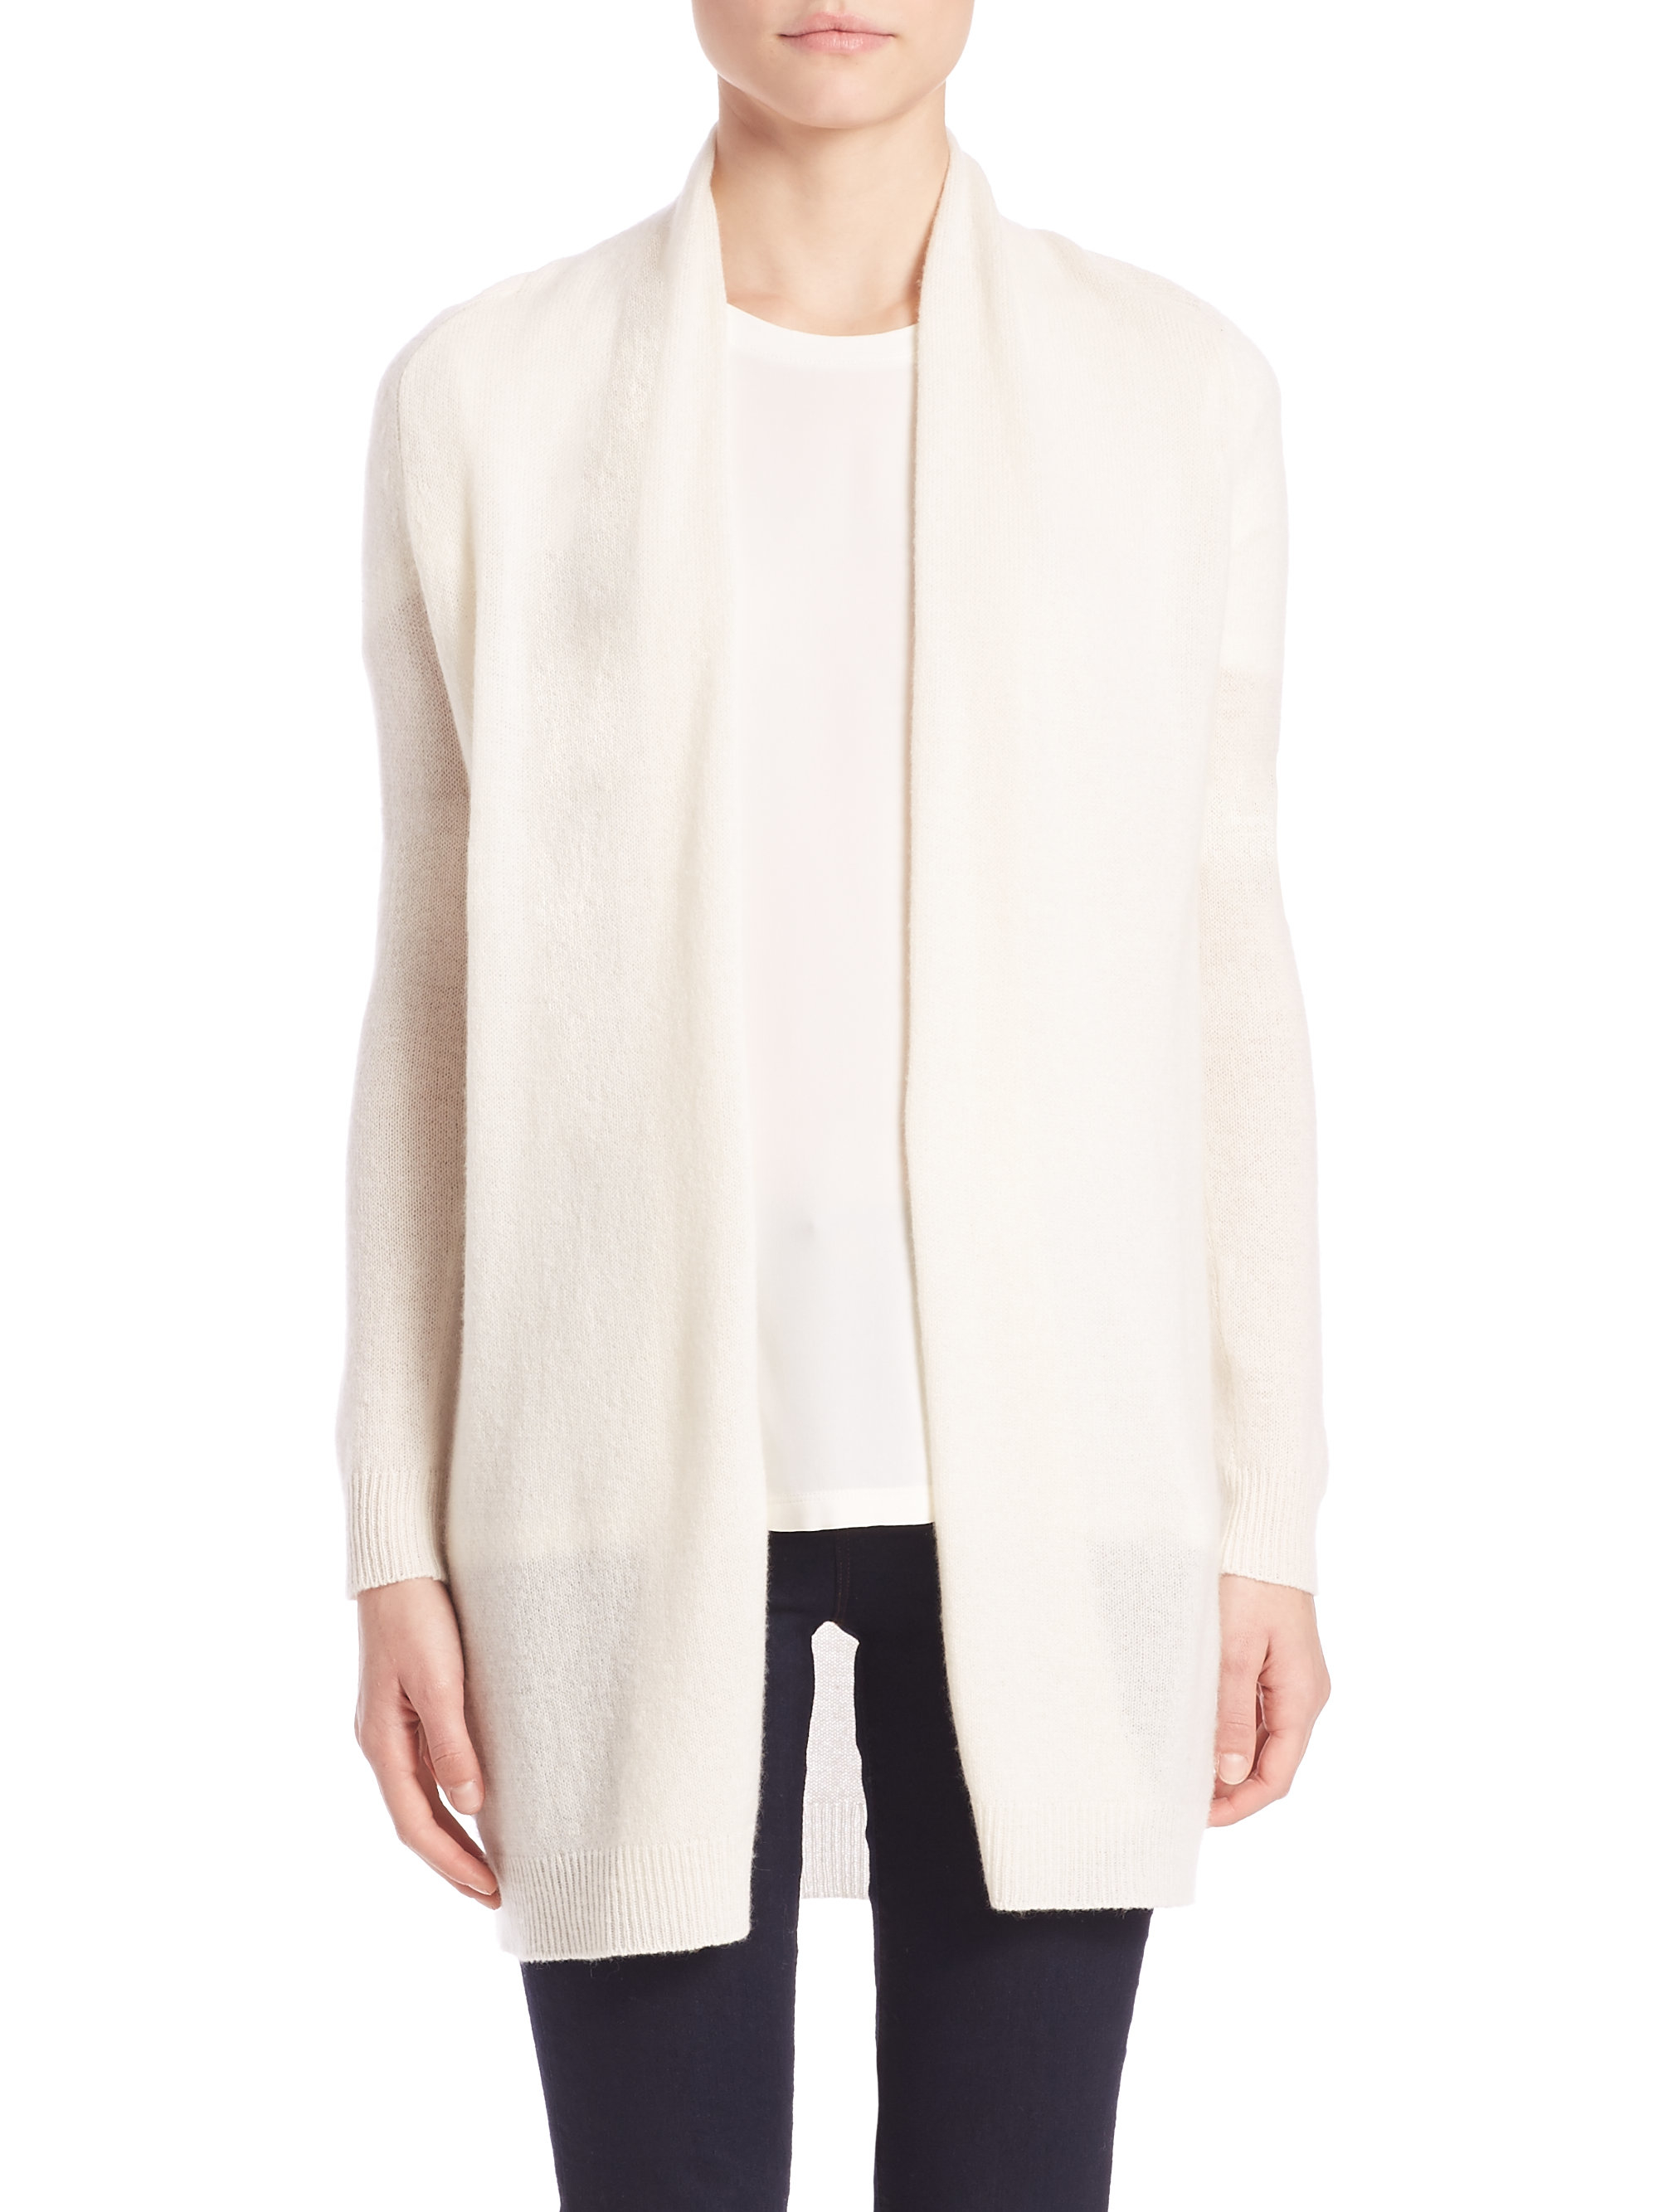 Theory Ashtry Cashmere Open Cardigan in White | Lyst